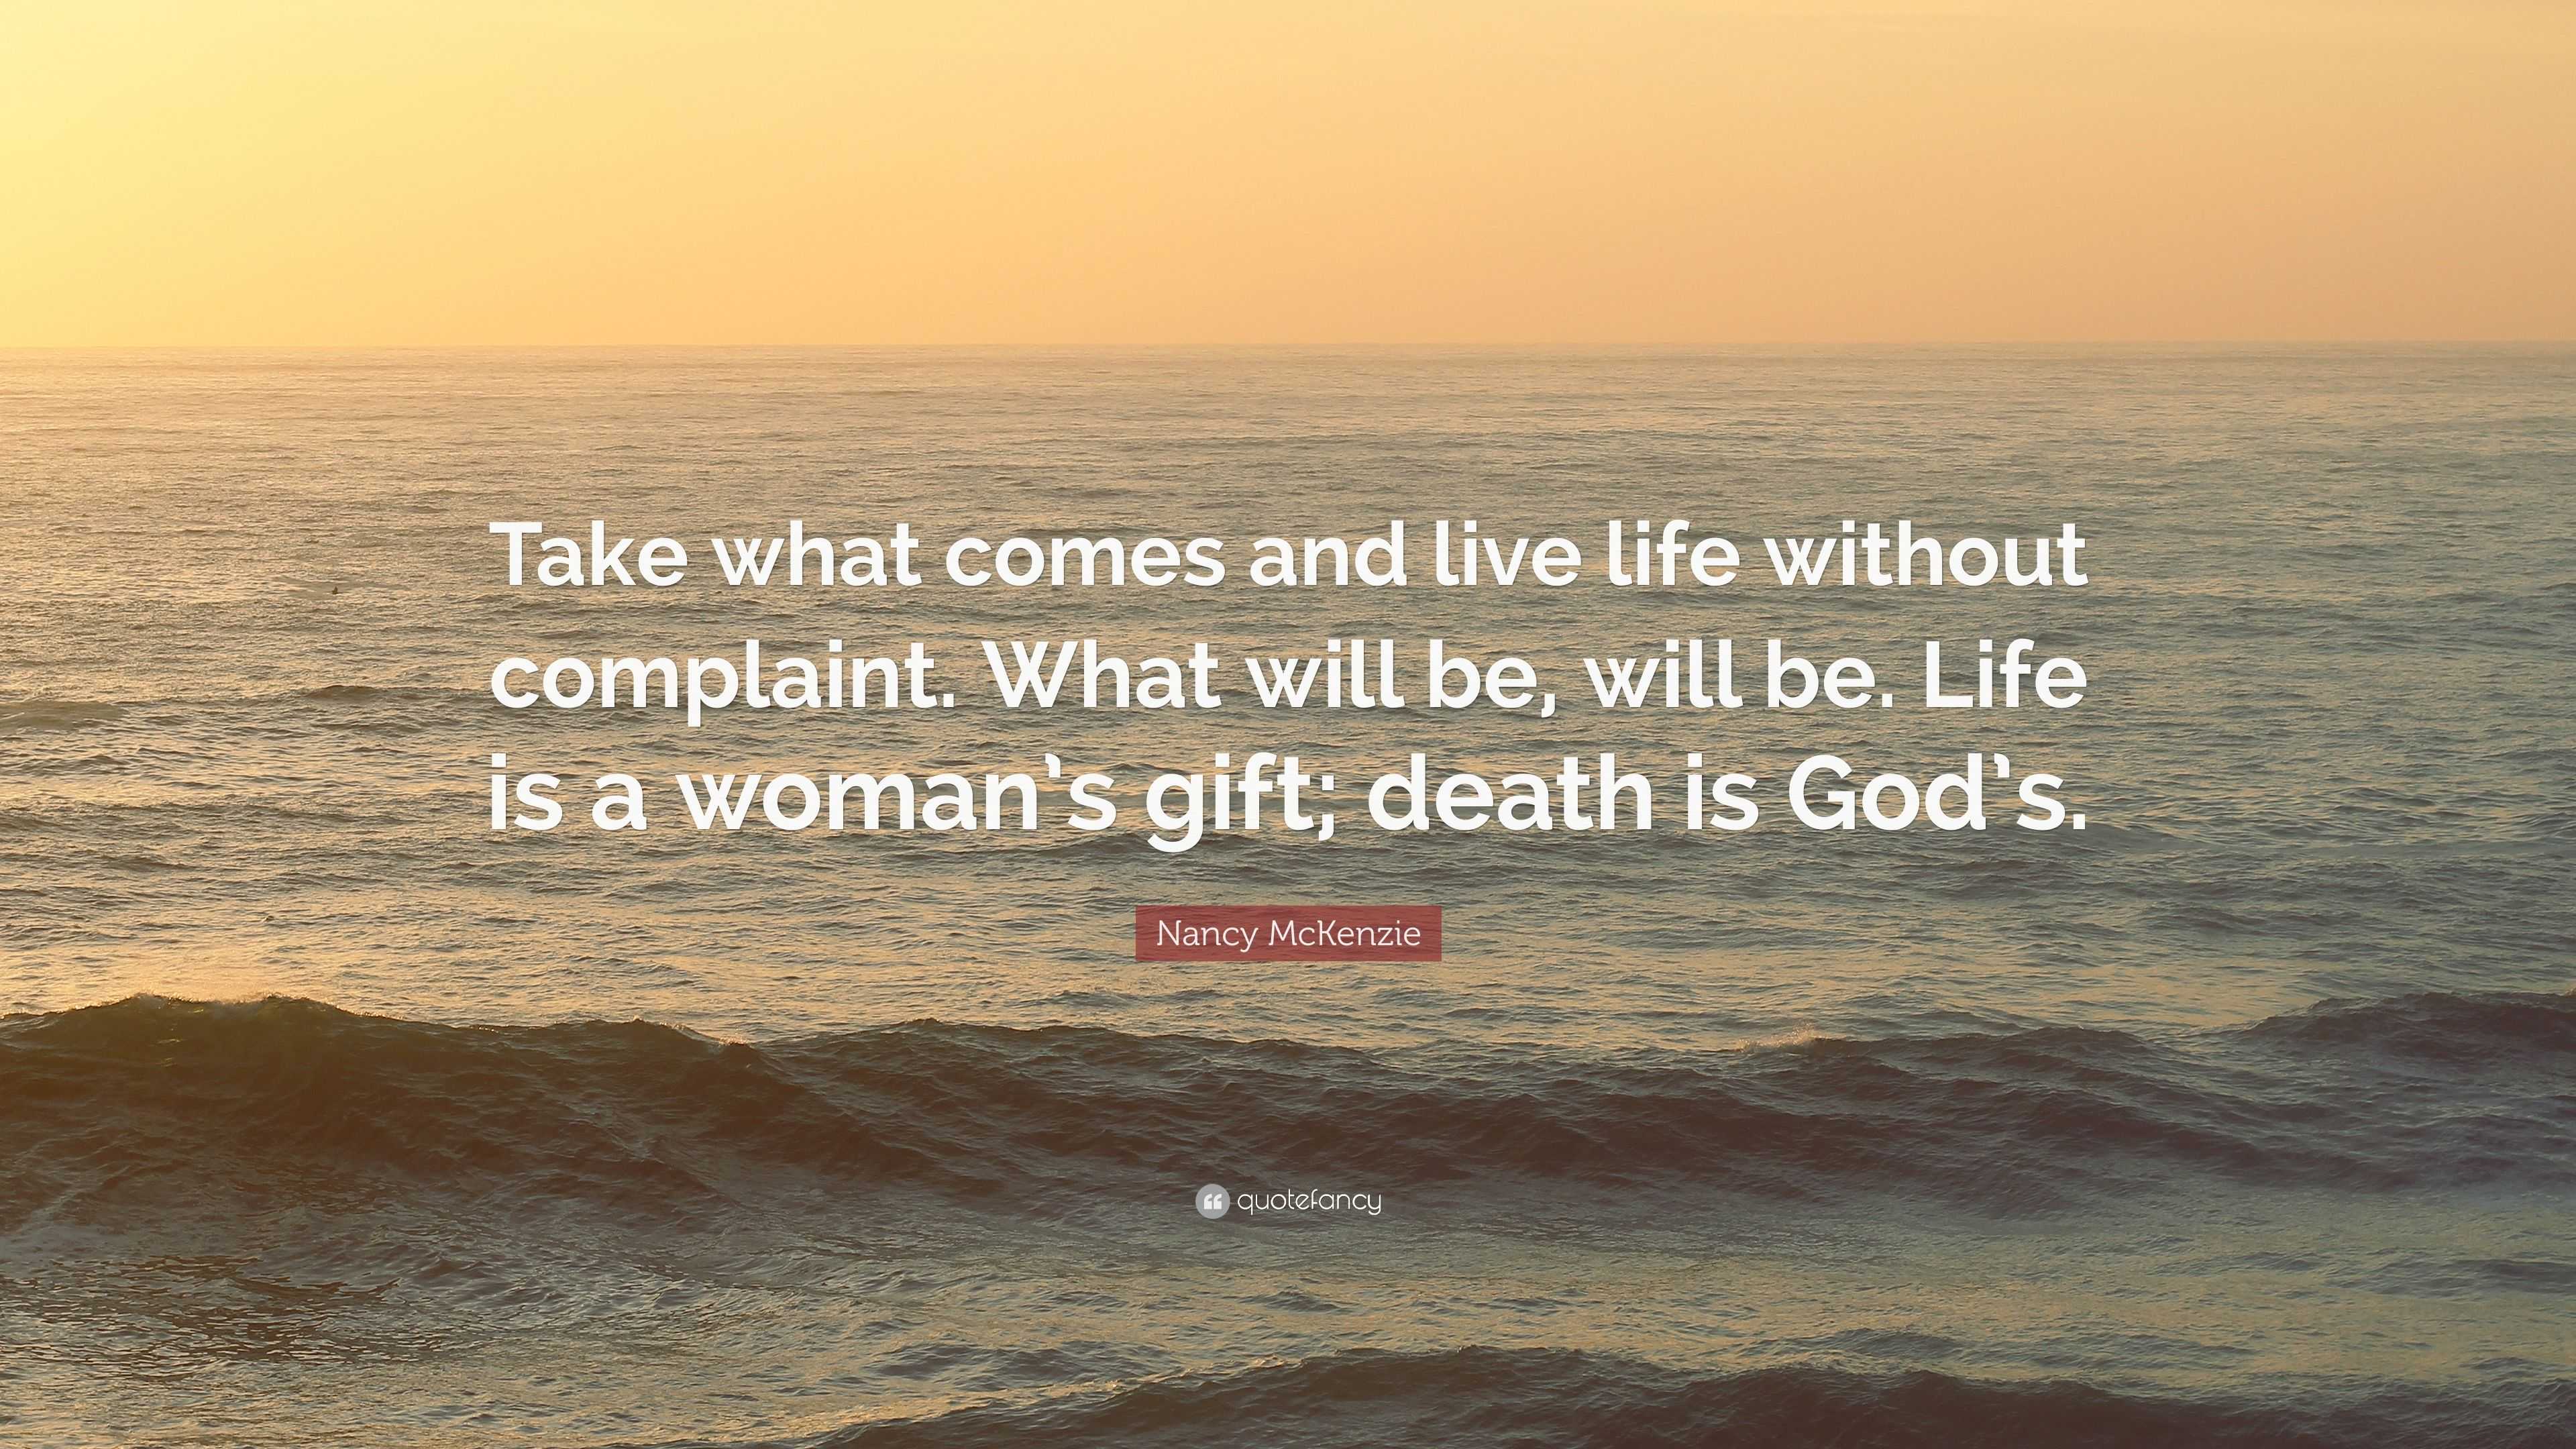 Nancy McKenzie Quote “Take what es and live life without plaint What will